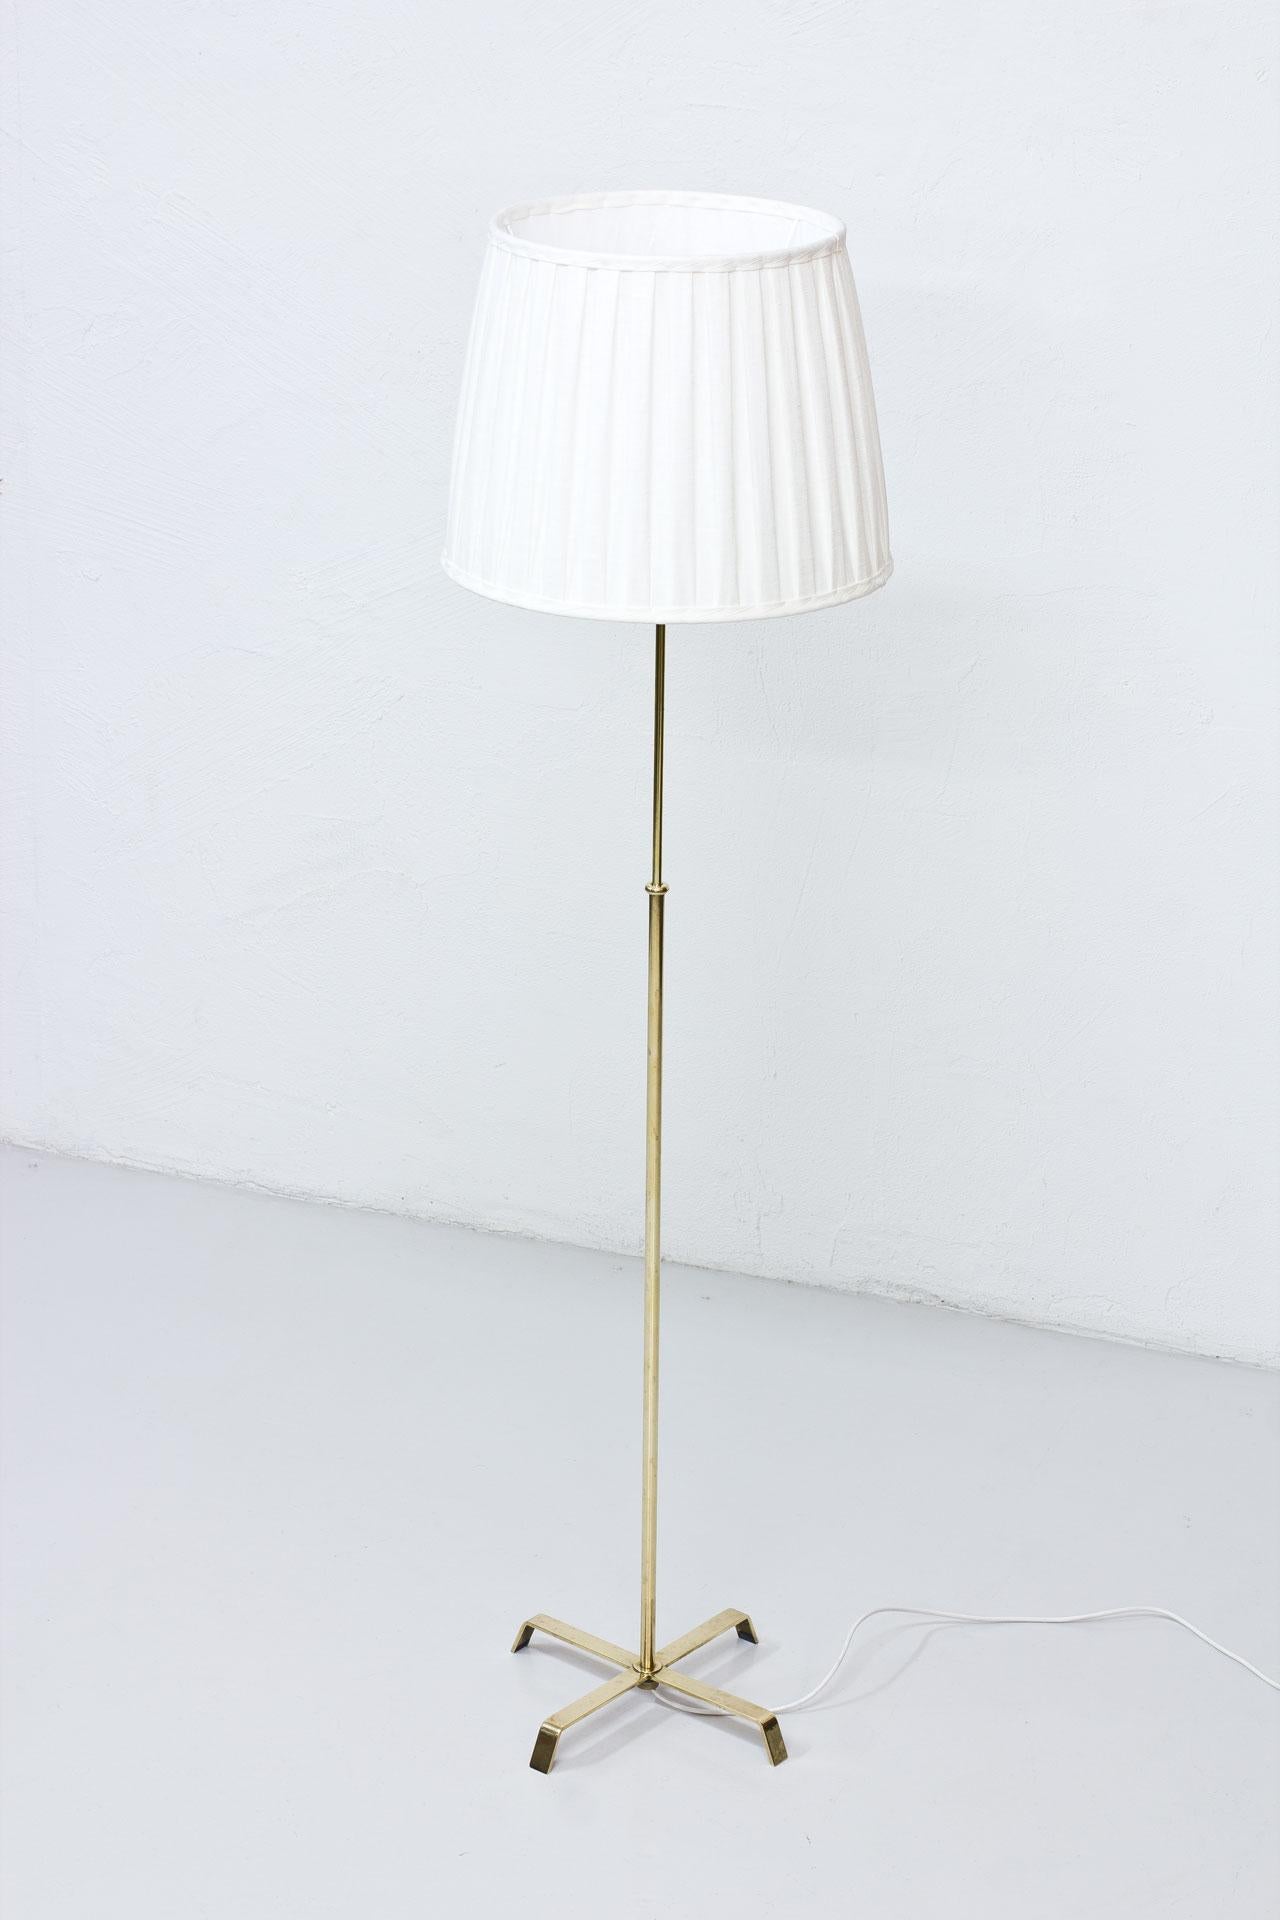 Floor lamp manufactured in Sweden by Böhlmarks Lamp fabrik during the 1940s.  Made from brass with hand pleated lamp shade in linen fabric.
Adjustable height of the stem. Engraved underneath the base.
